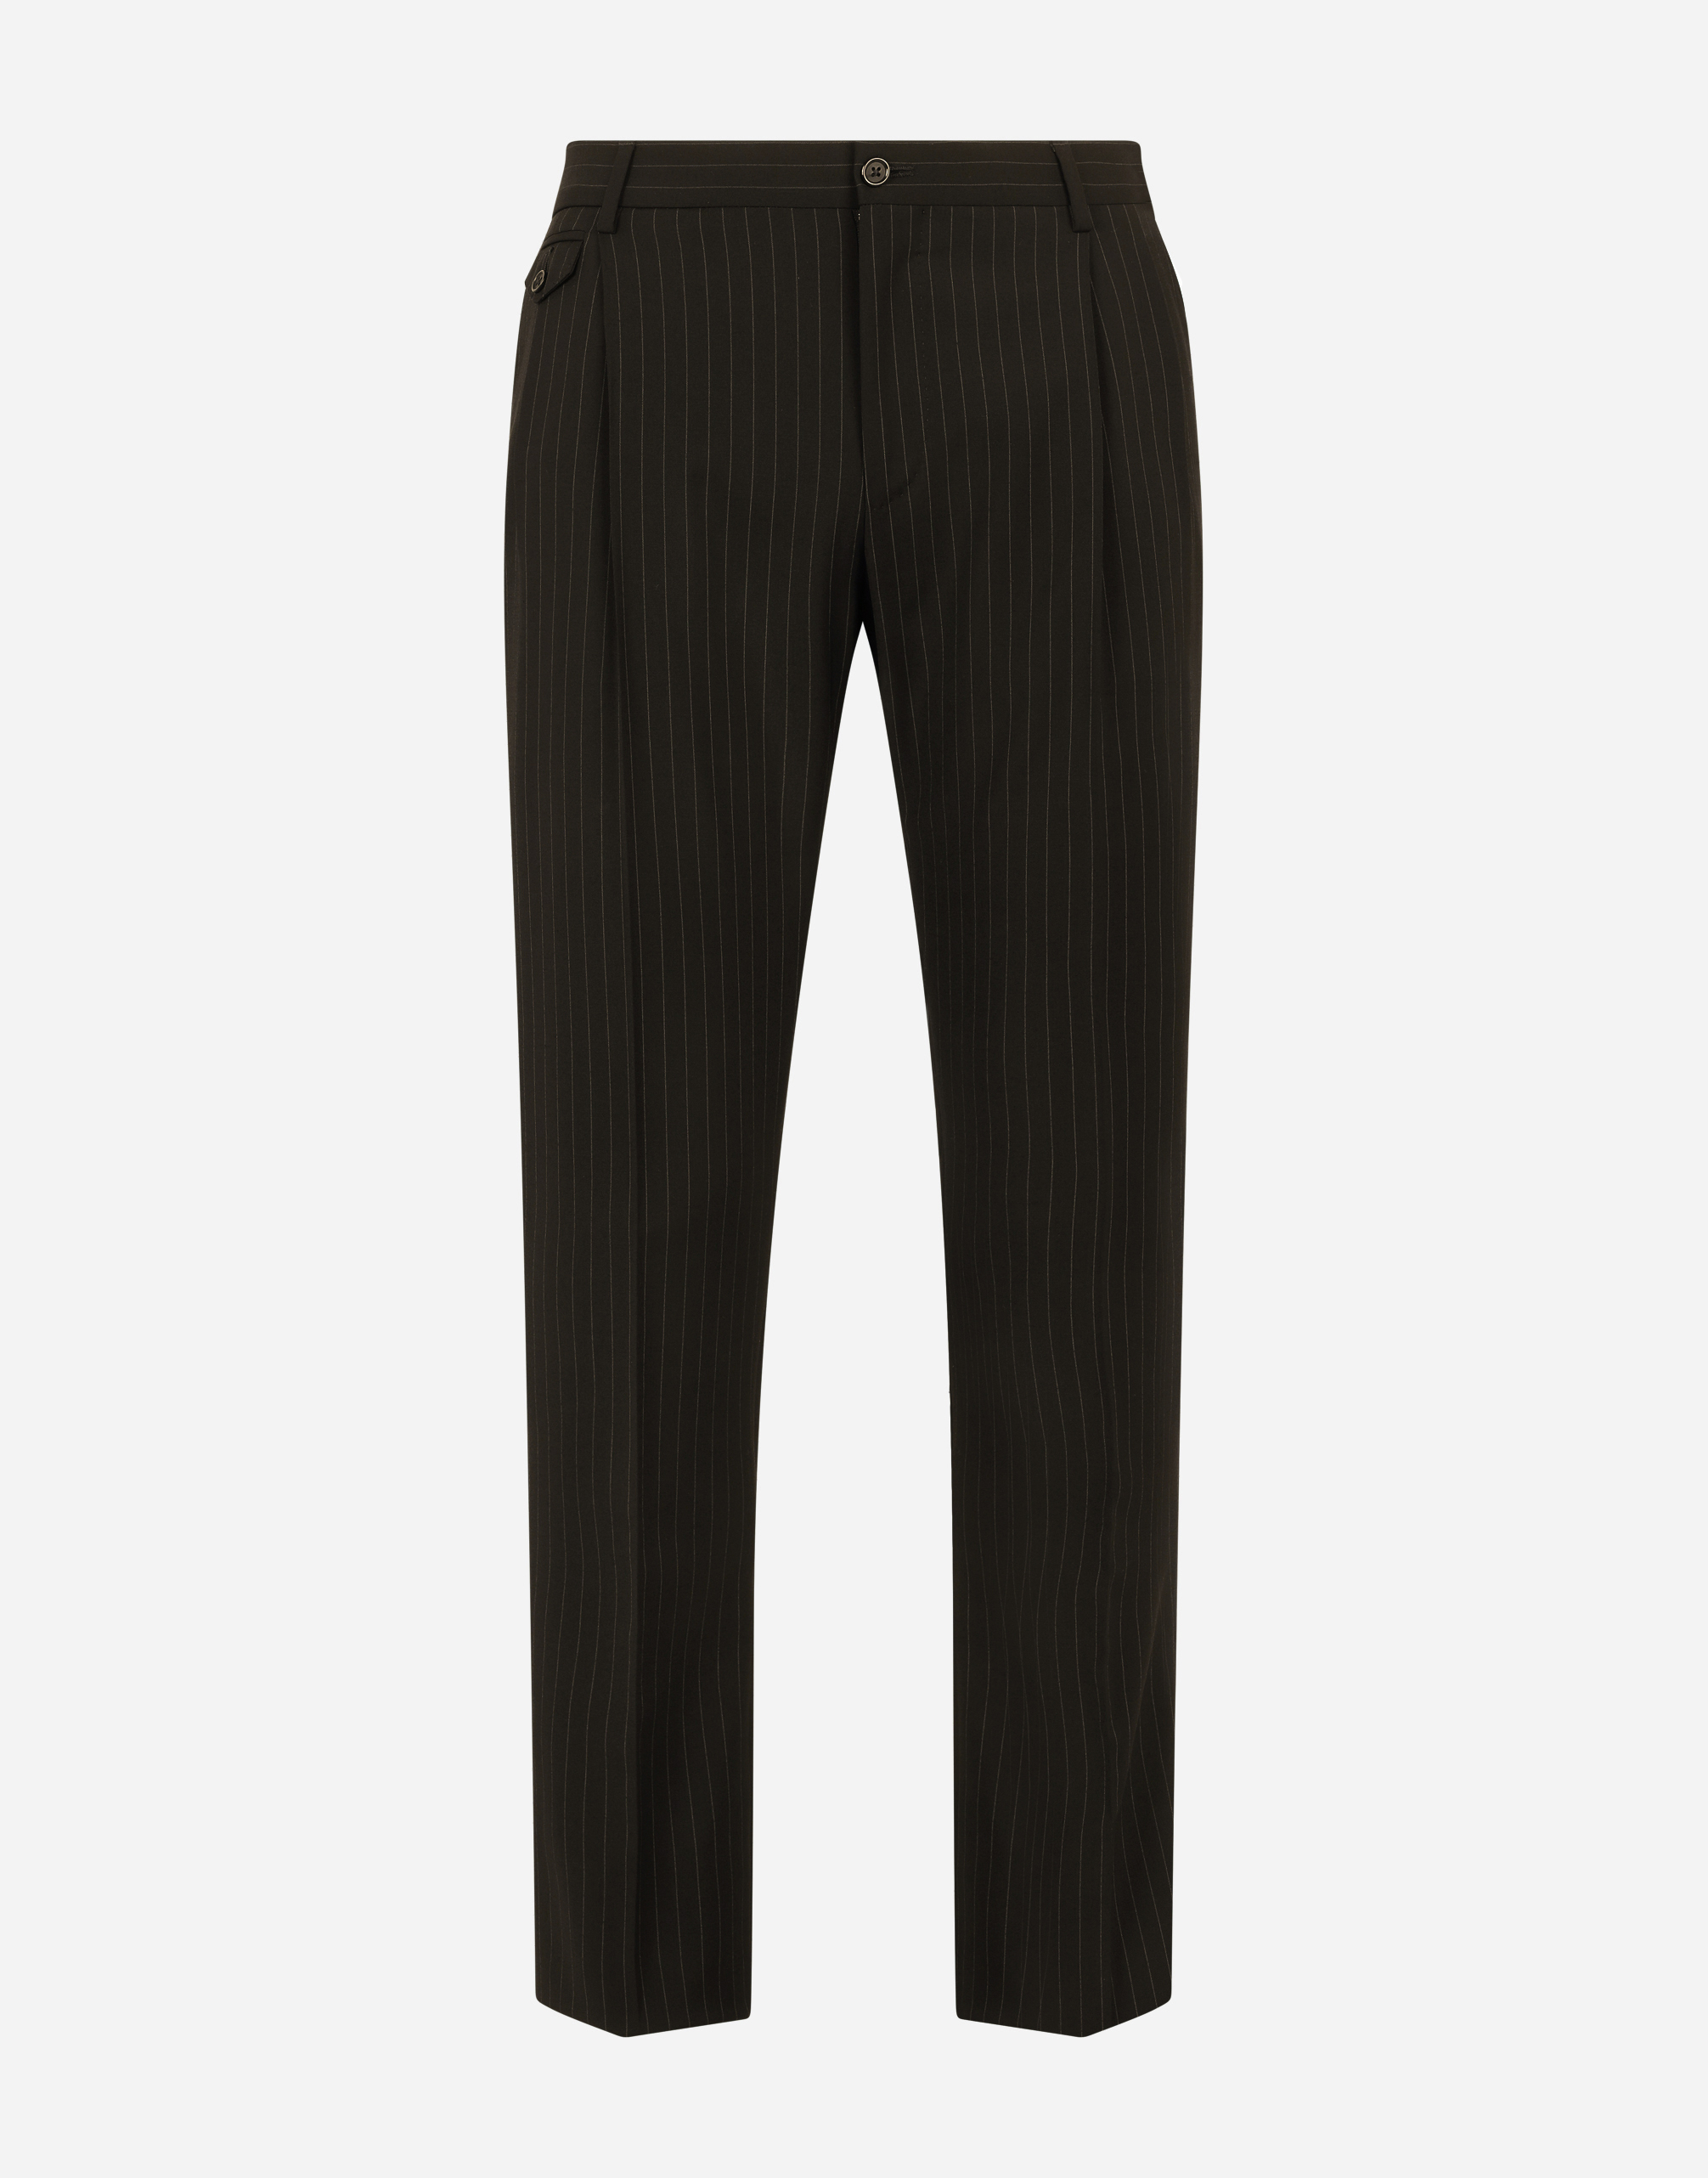 Stretch pinstripe pants in Multicolor